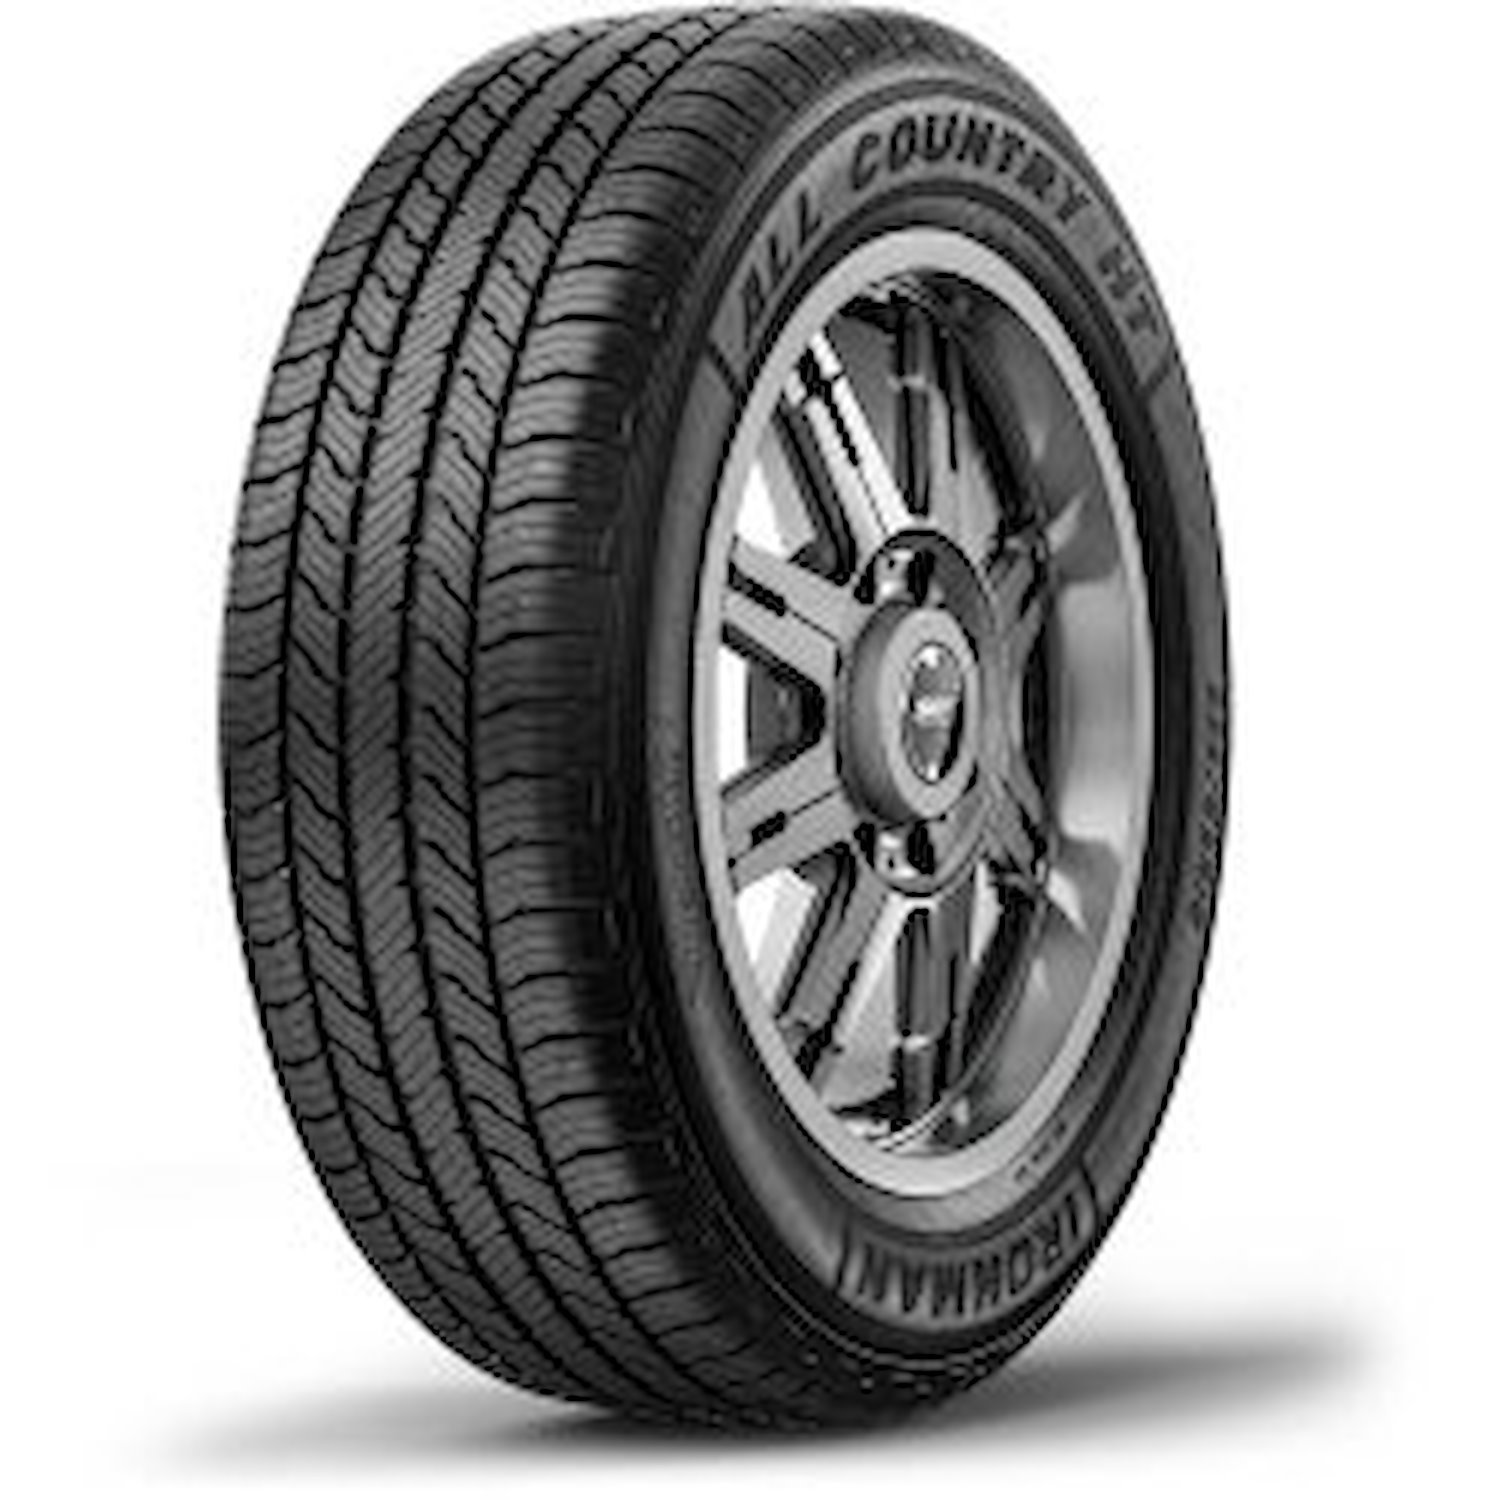 03082 All Country HT Tire, 275/65R18, 116T